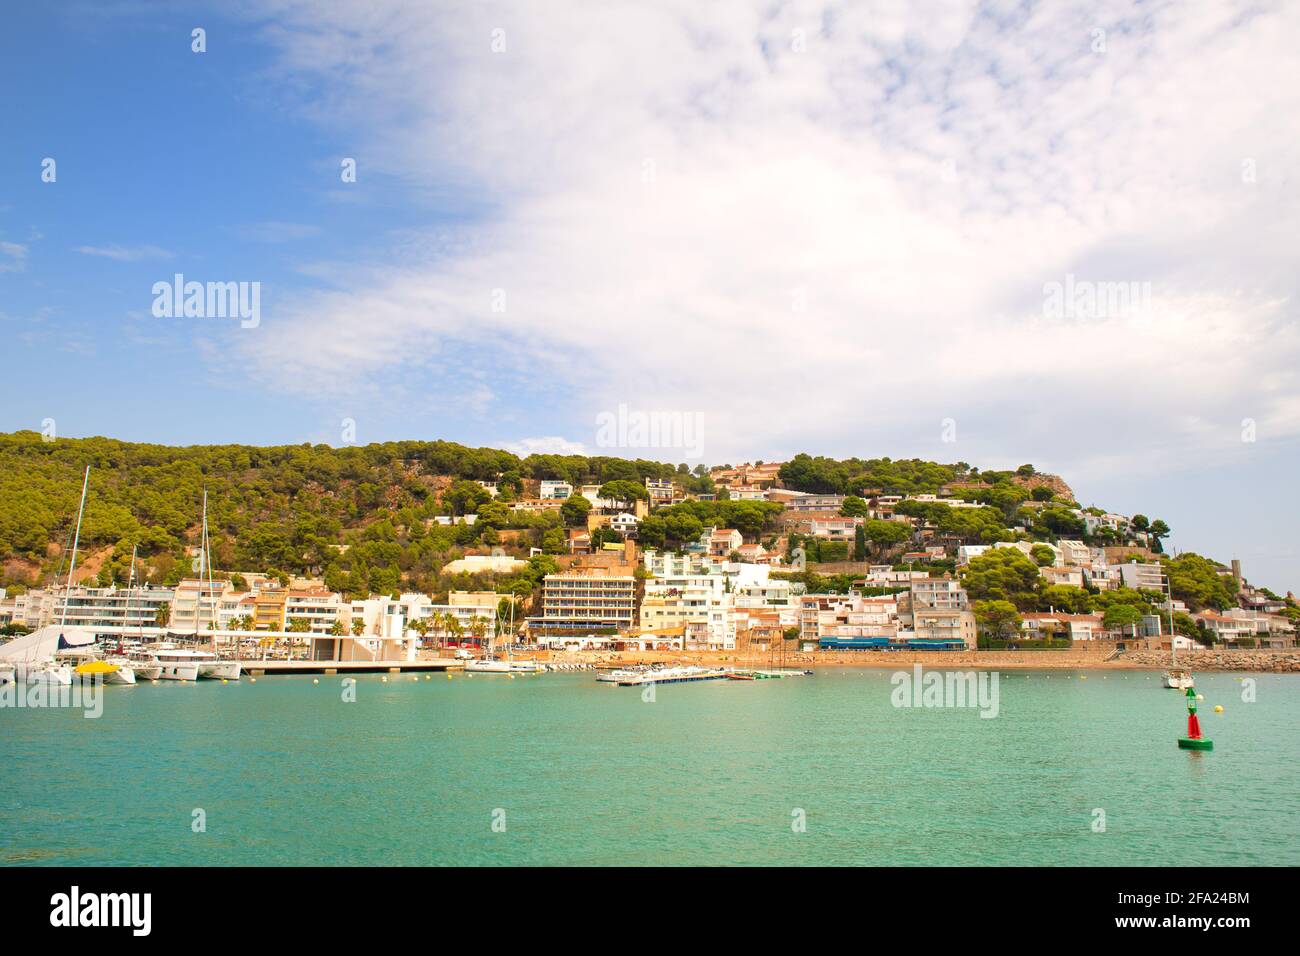 Coast with islands and harbor in Estartit Spain Stock Photo